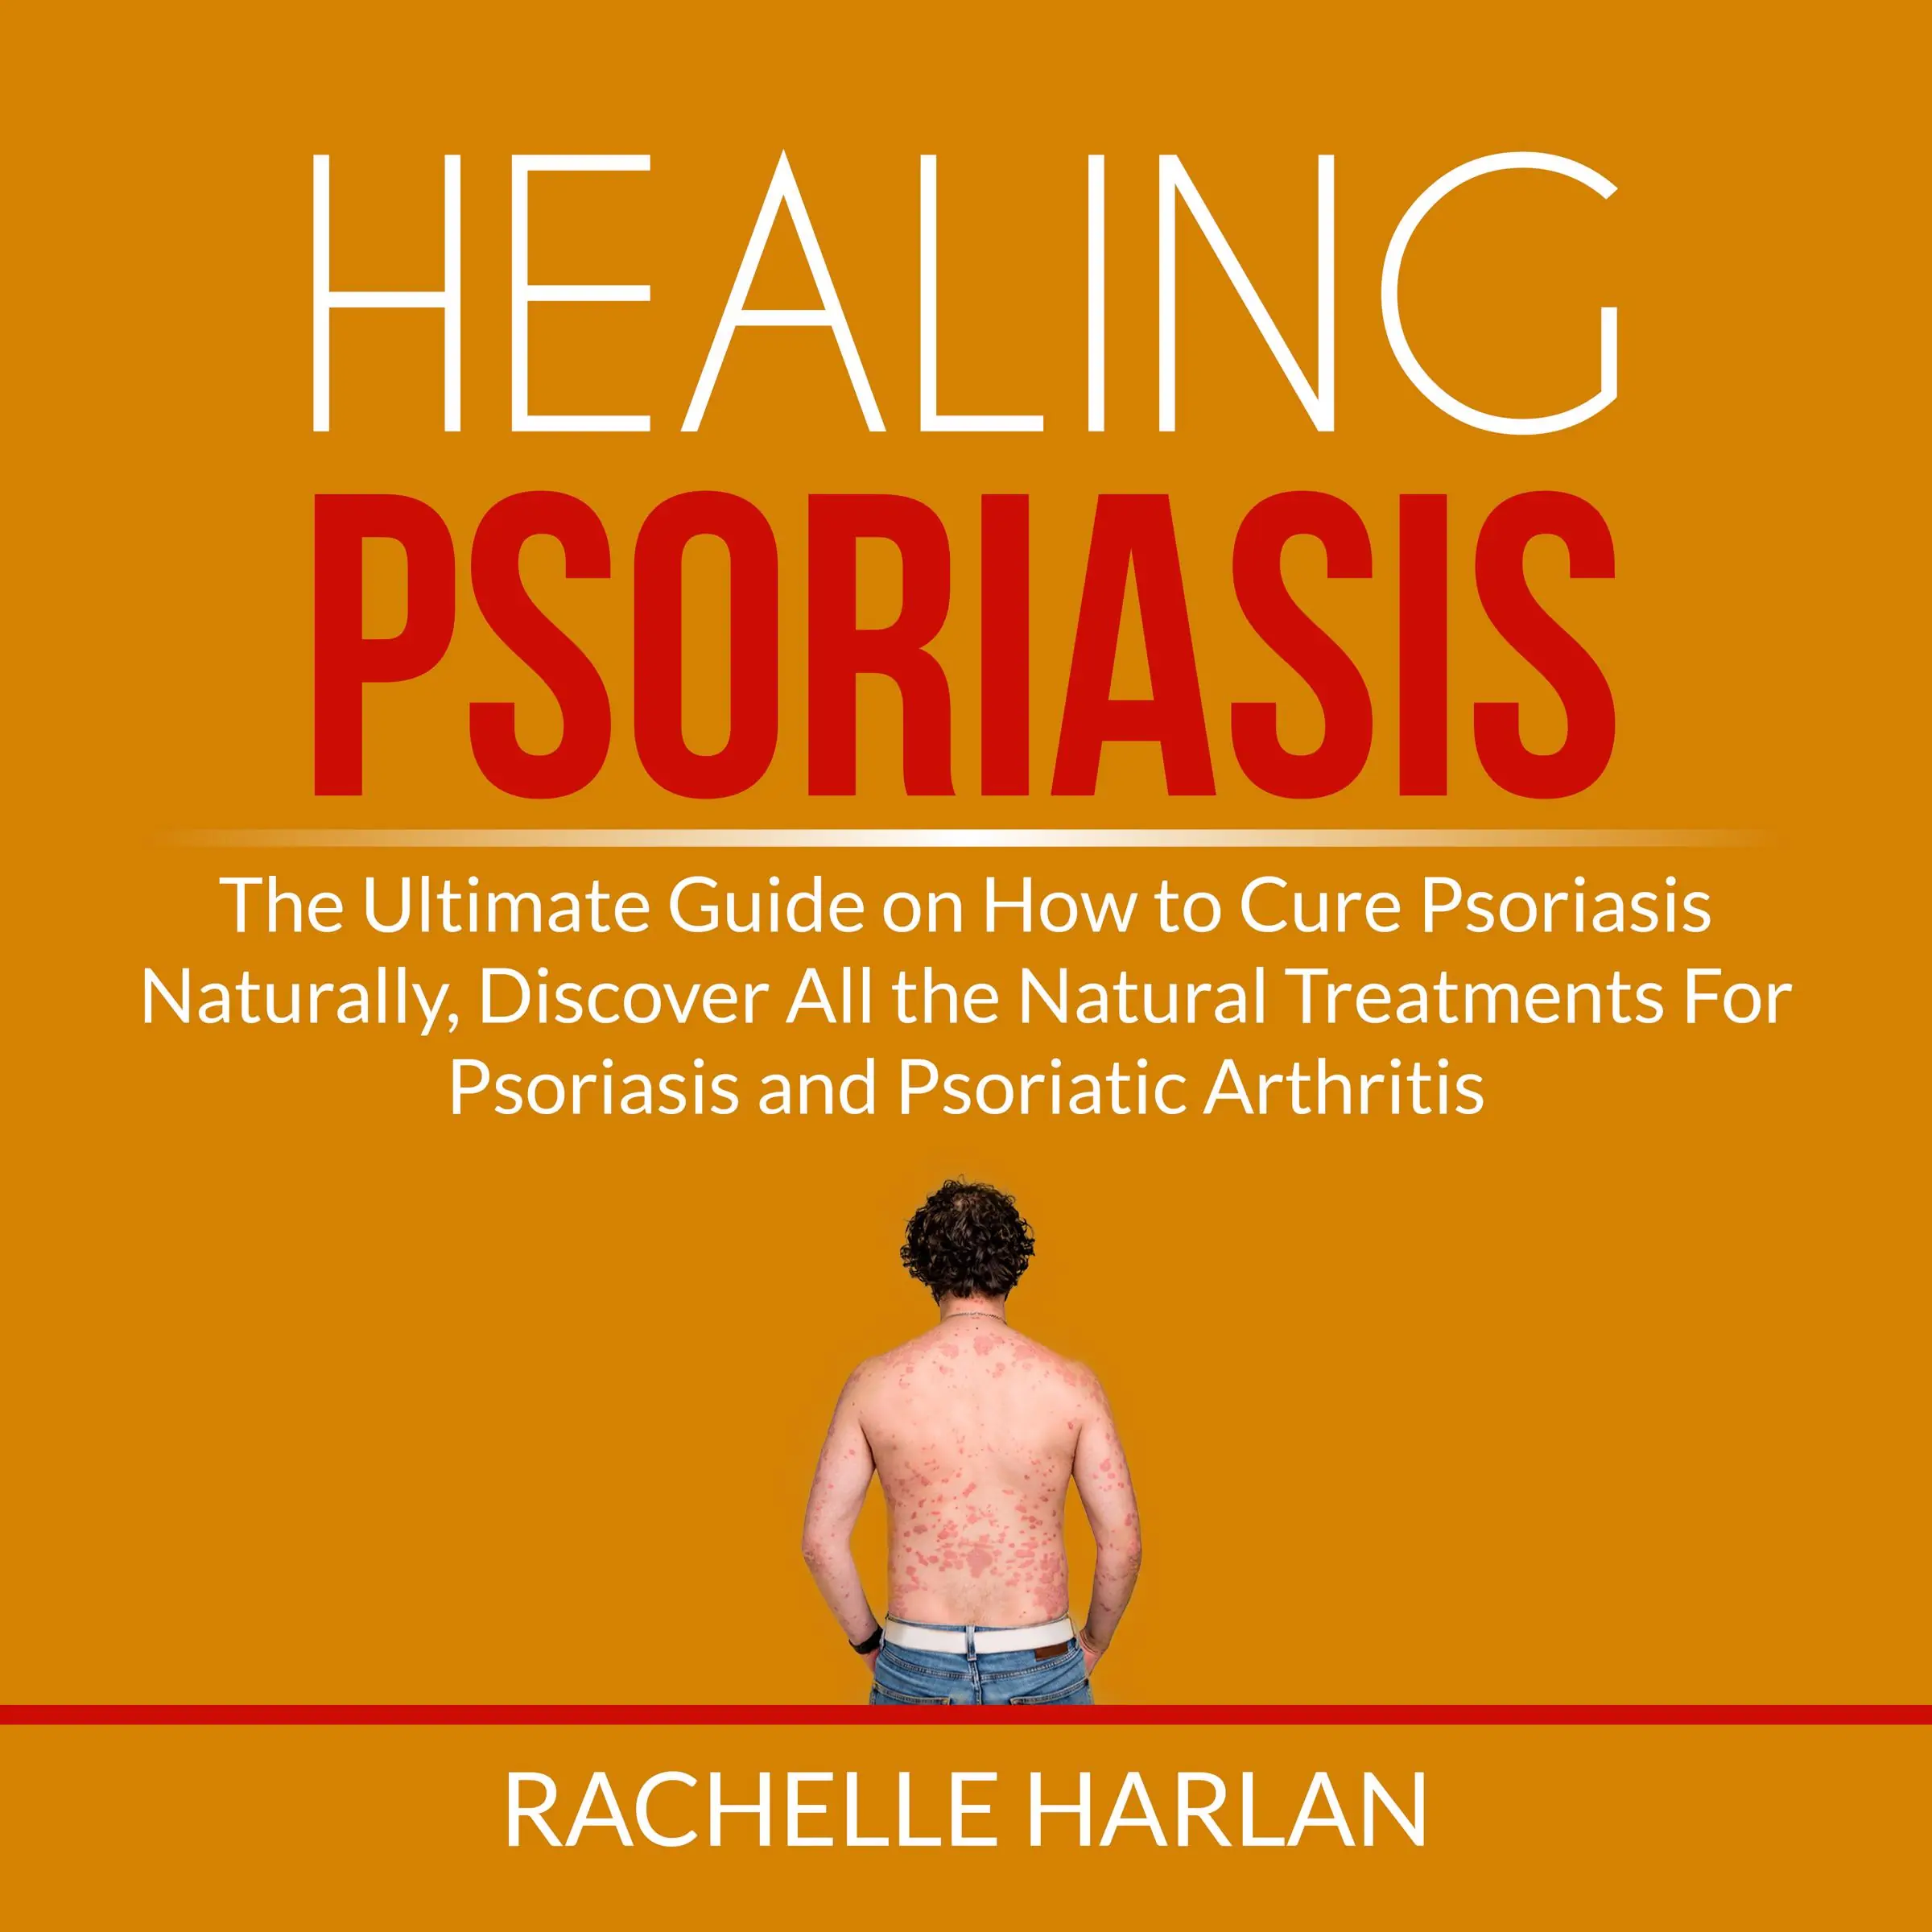 Healing Psoriasis: The Ultimate Guide on How to Cure Psoriasis Naturally, Discover All the Natural Treatments For Psoriasis and Psoriatic Arthritis Audiobook by Rachelle Harlan